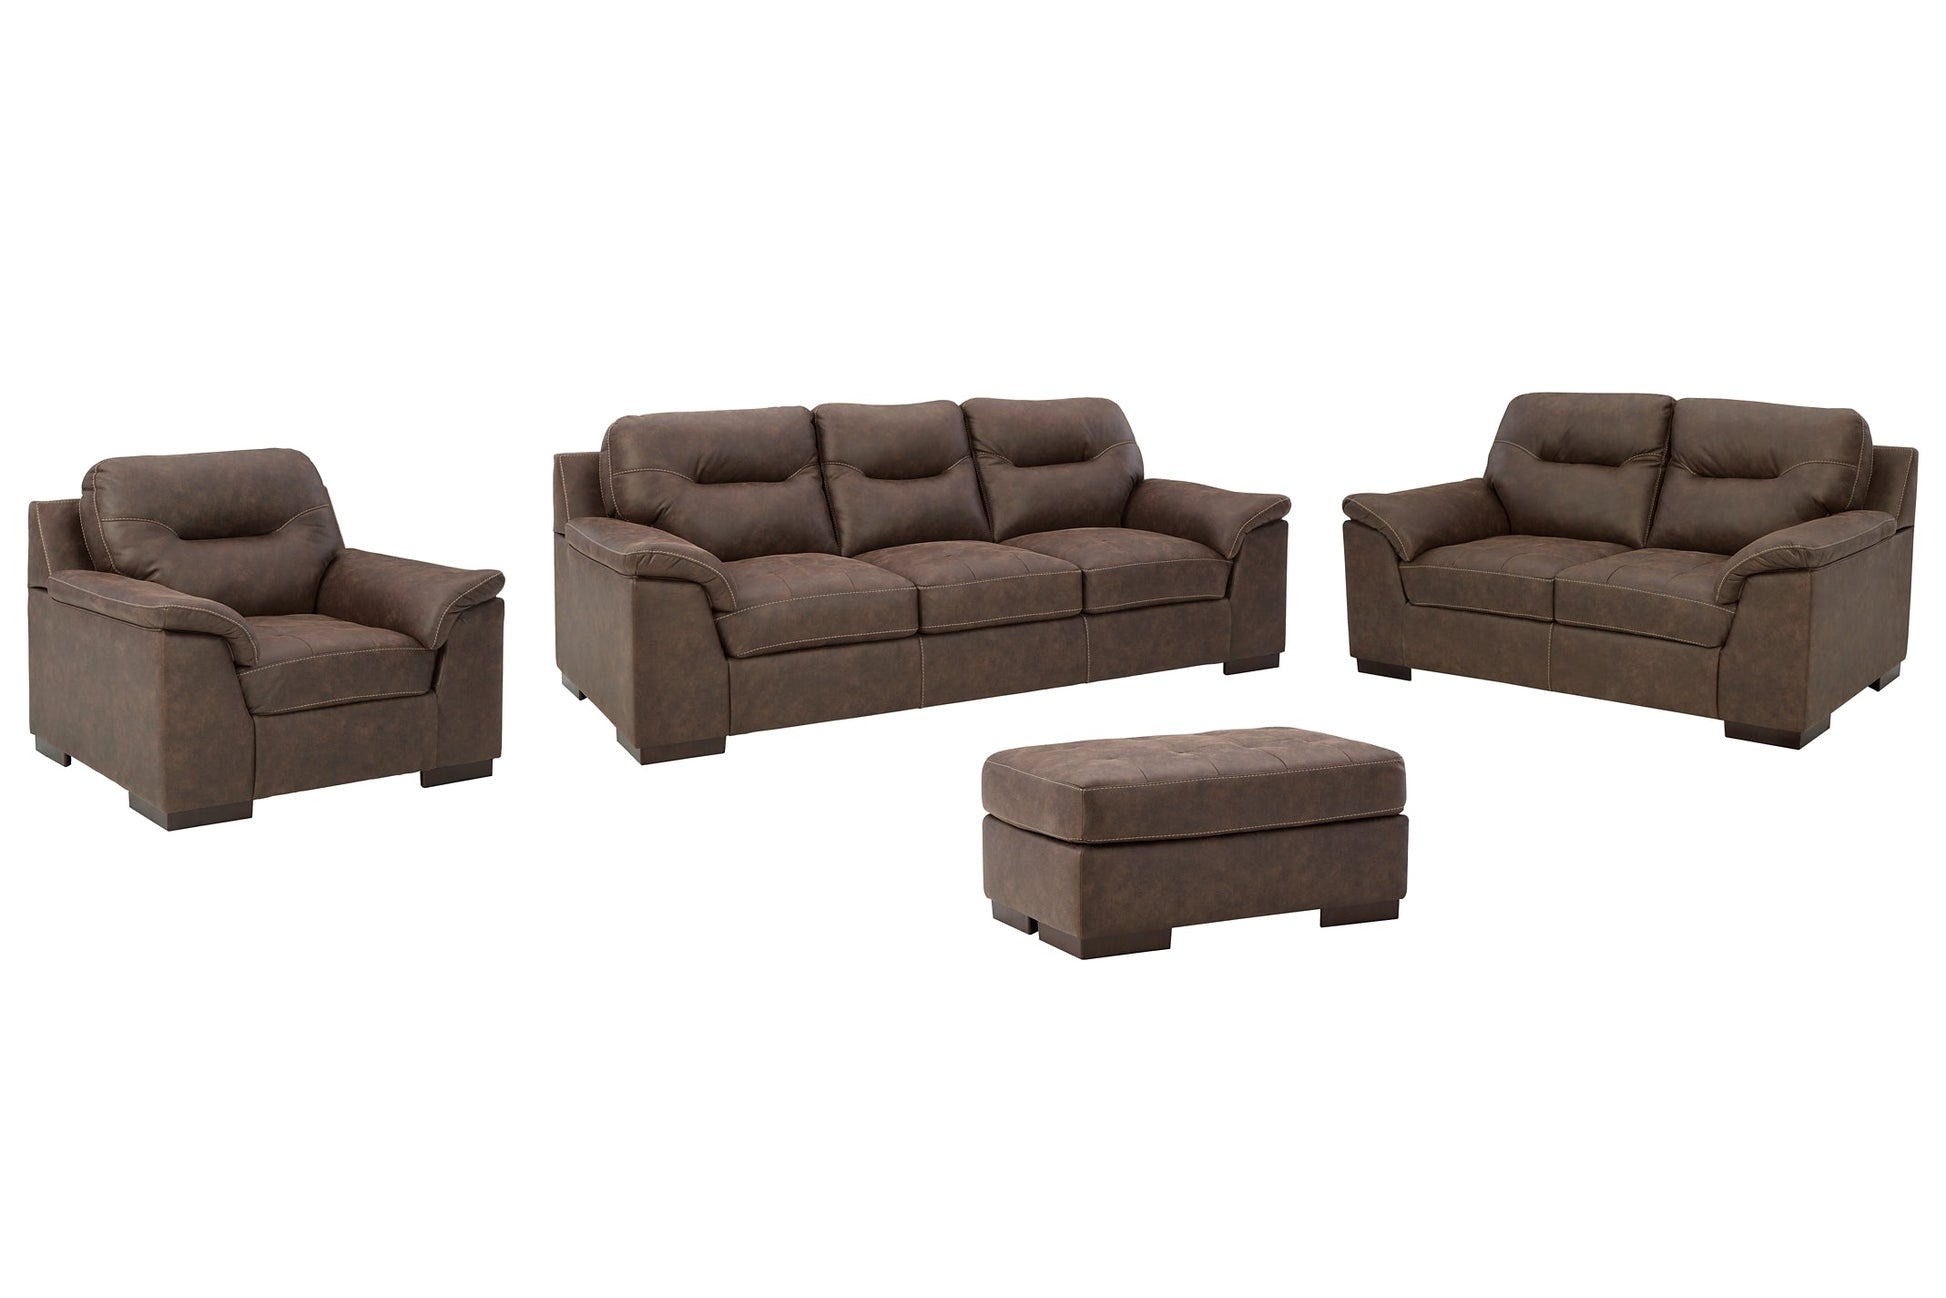 Maderla Sofa, Loveseat, Chair and Ottoman at Walker Mattress and Furniture Locations in Cedar Park and Belton TX.